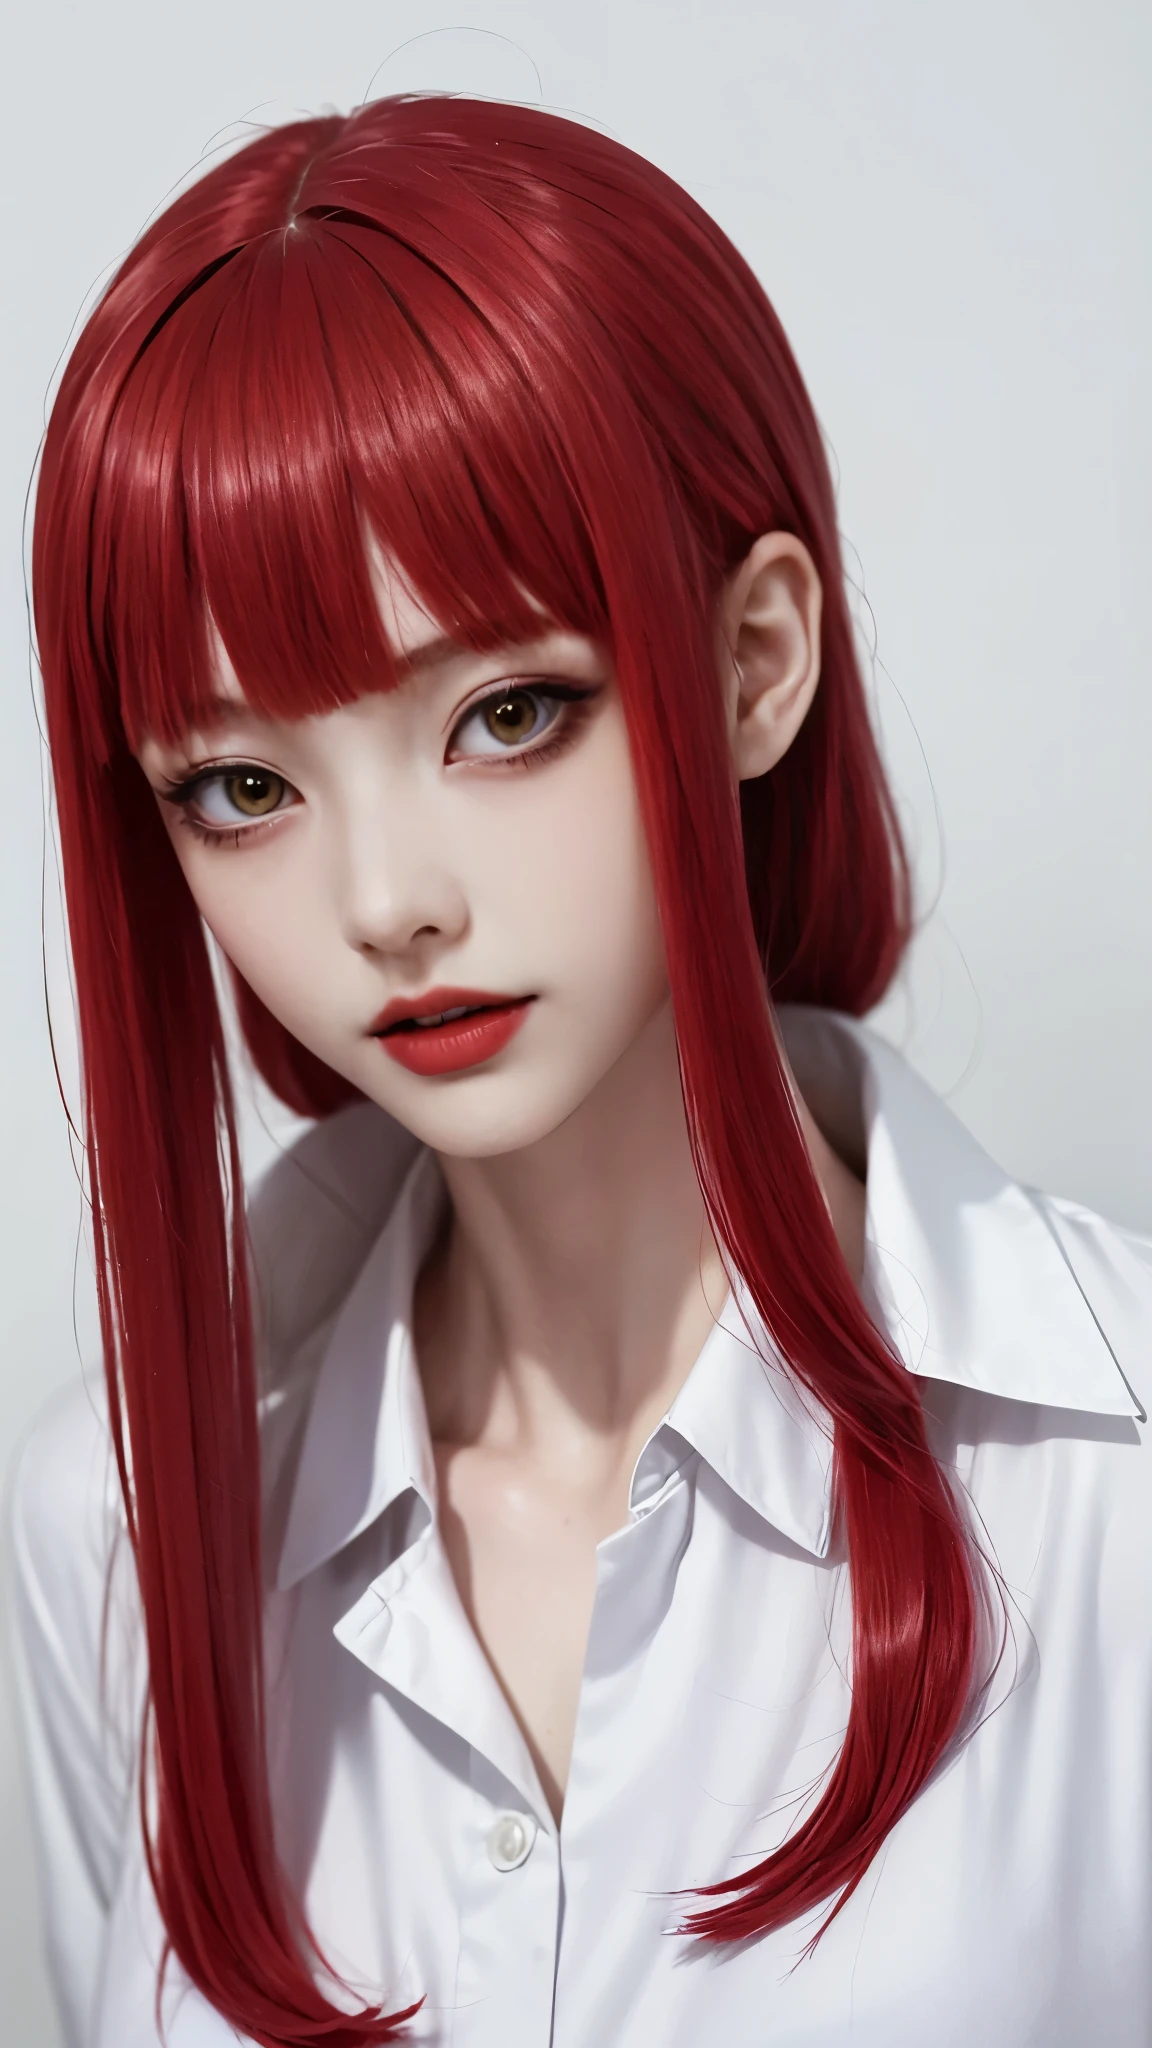 (((Makima))) from chainsaw man,Mappa, white background , Red hairs, white shirt,black tie, expressive eyes,evil happy look,red lips , beautiful evil look,pale skin,red lips,
Clear white background, big breasts,beautiful big eyes 